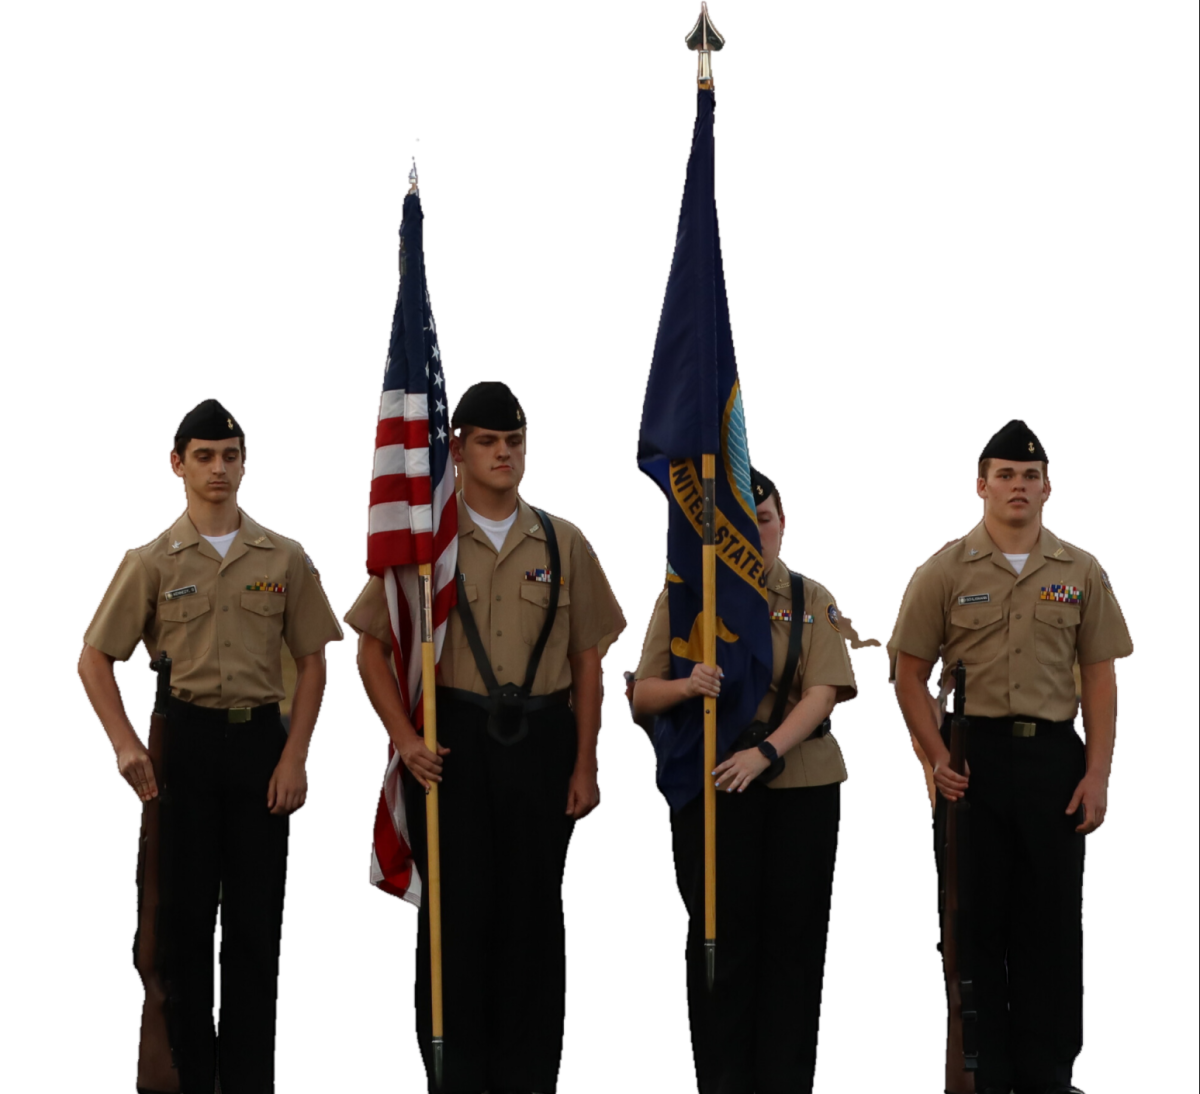 Rotc Cadets holding the American, and Navy flags